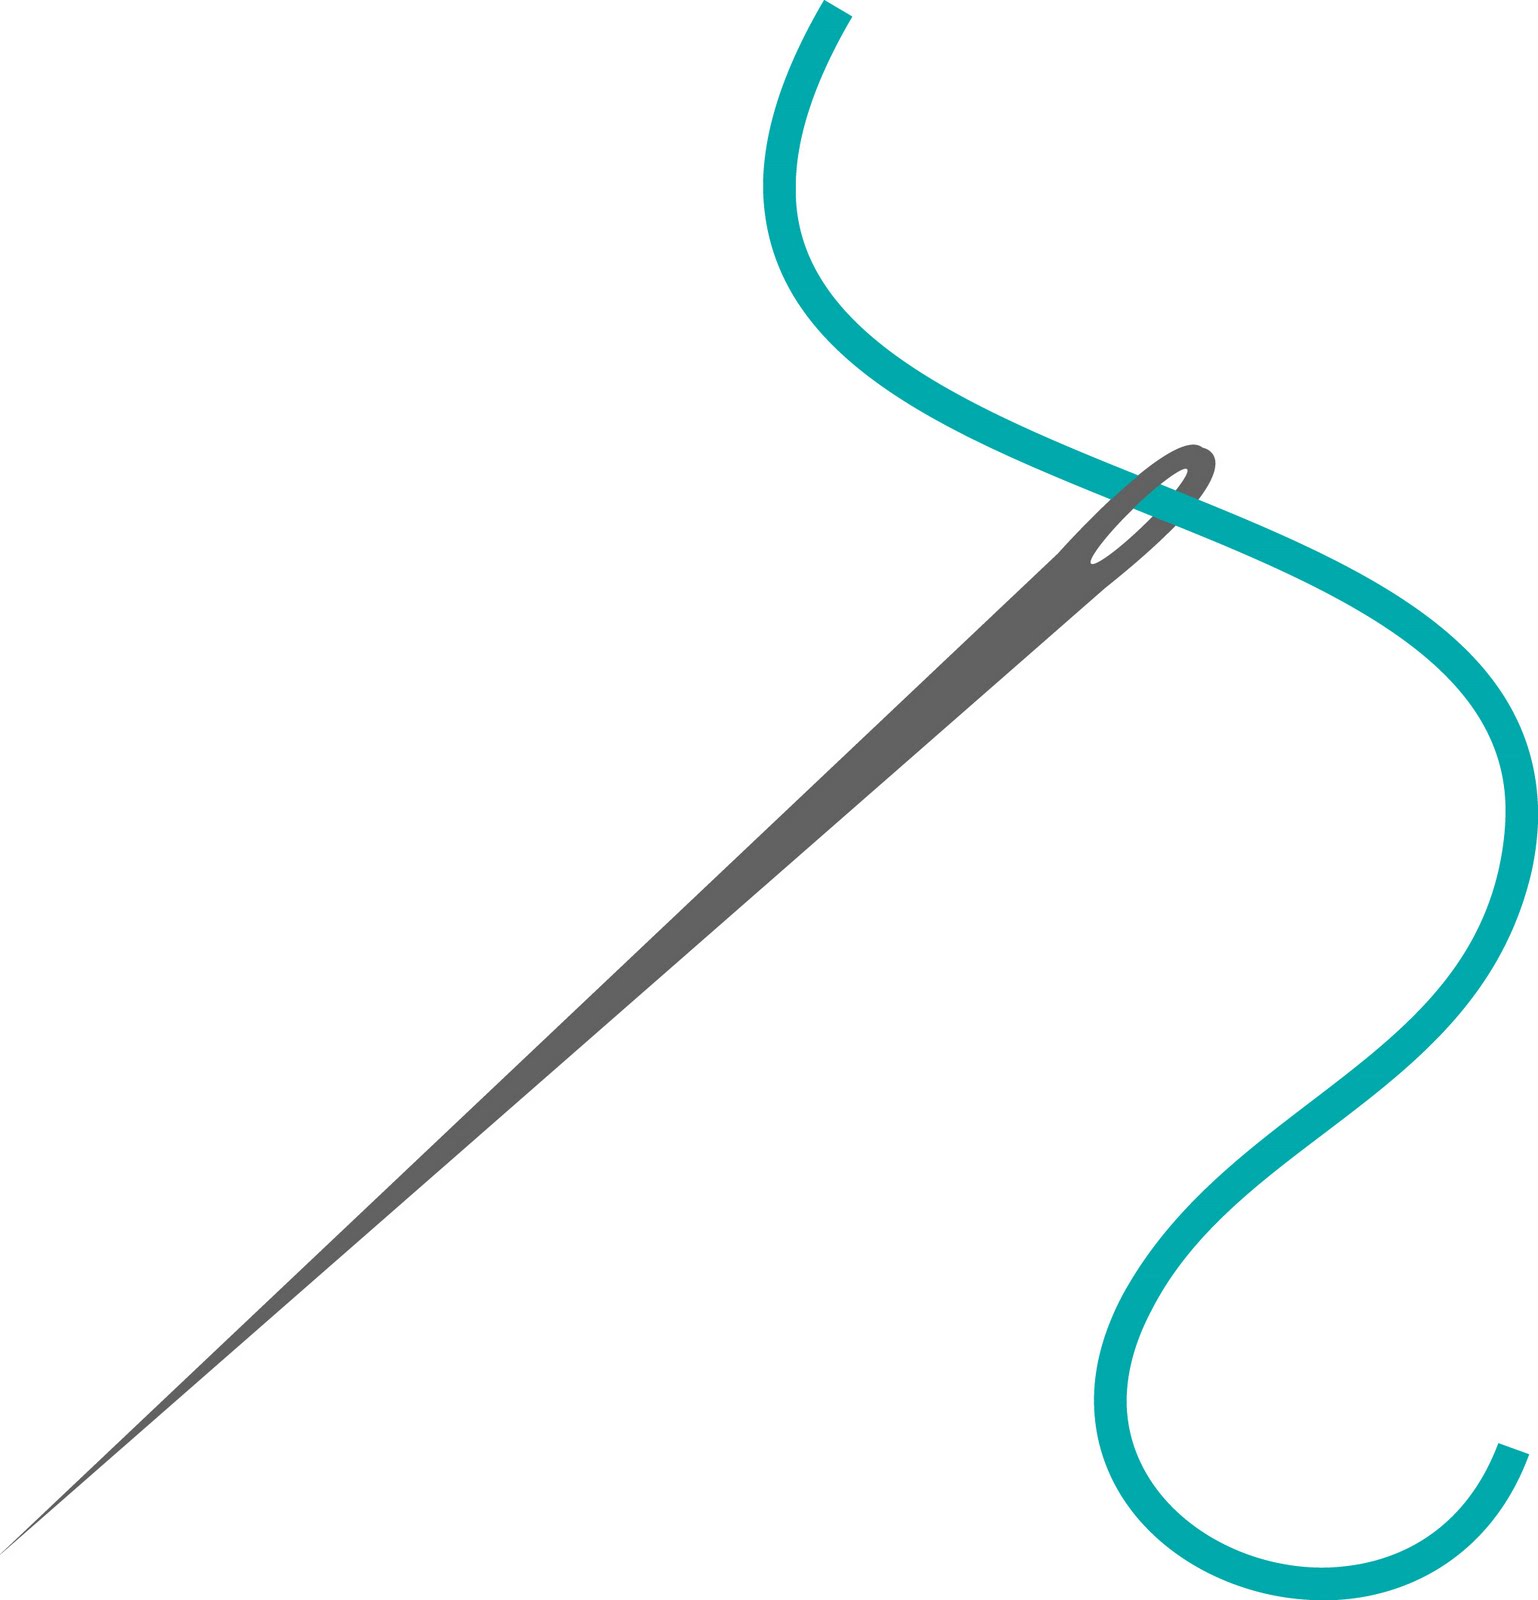 Free PNG Sewing Needle - 84824